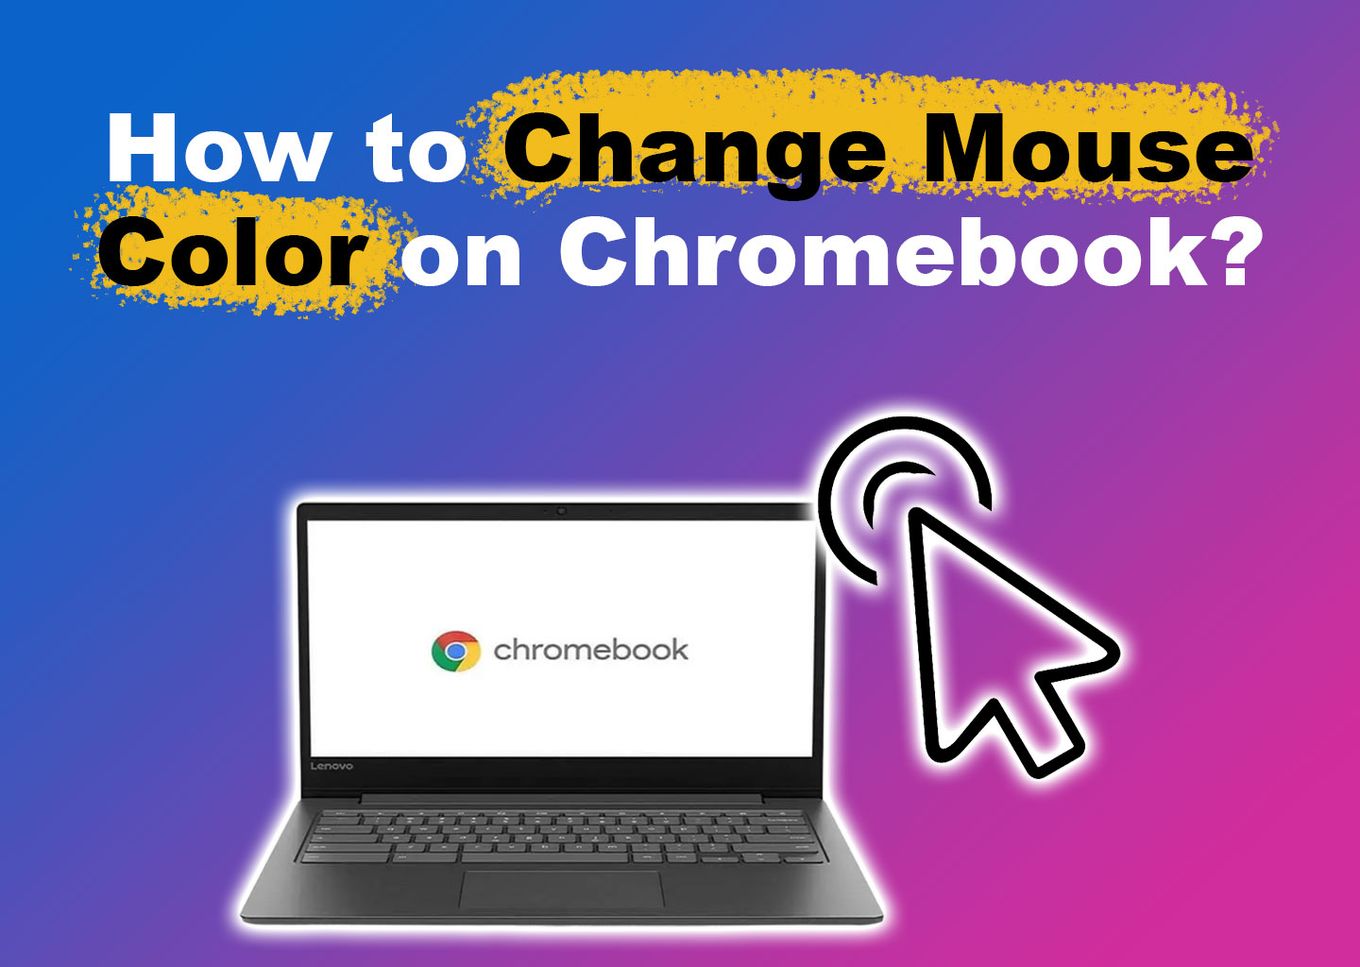 How to change mouse color on Chromebook